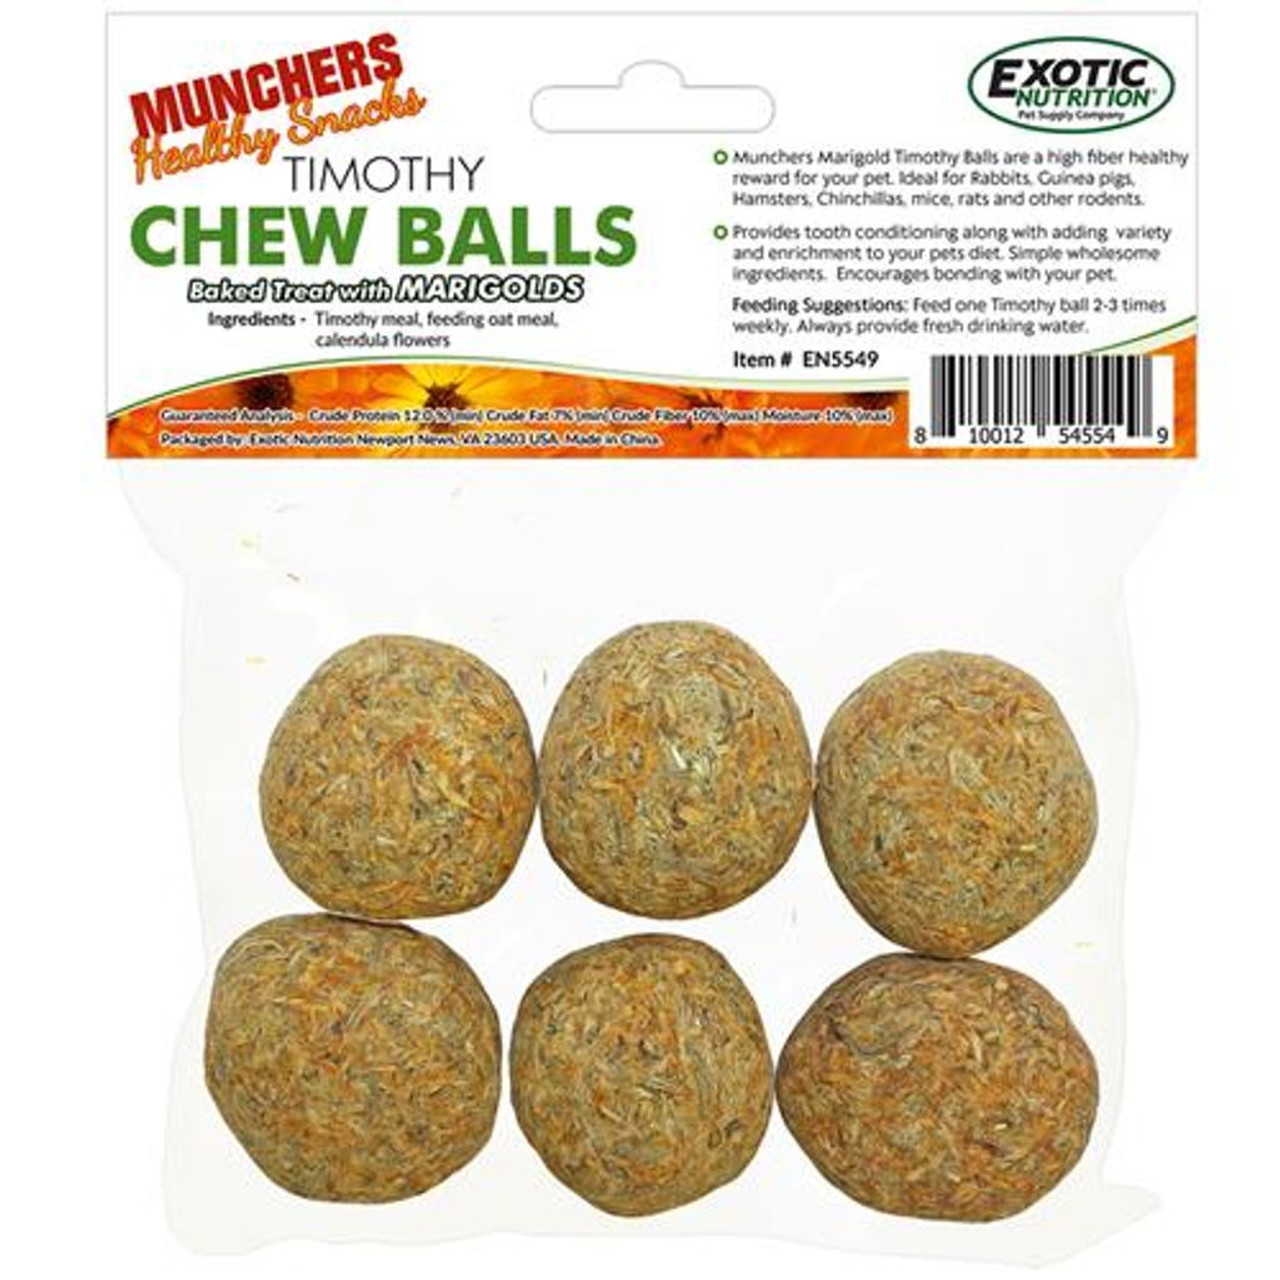 Exotic Nutrition Munchers Marigold and Timothy Chew Balls - 3 oz